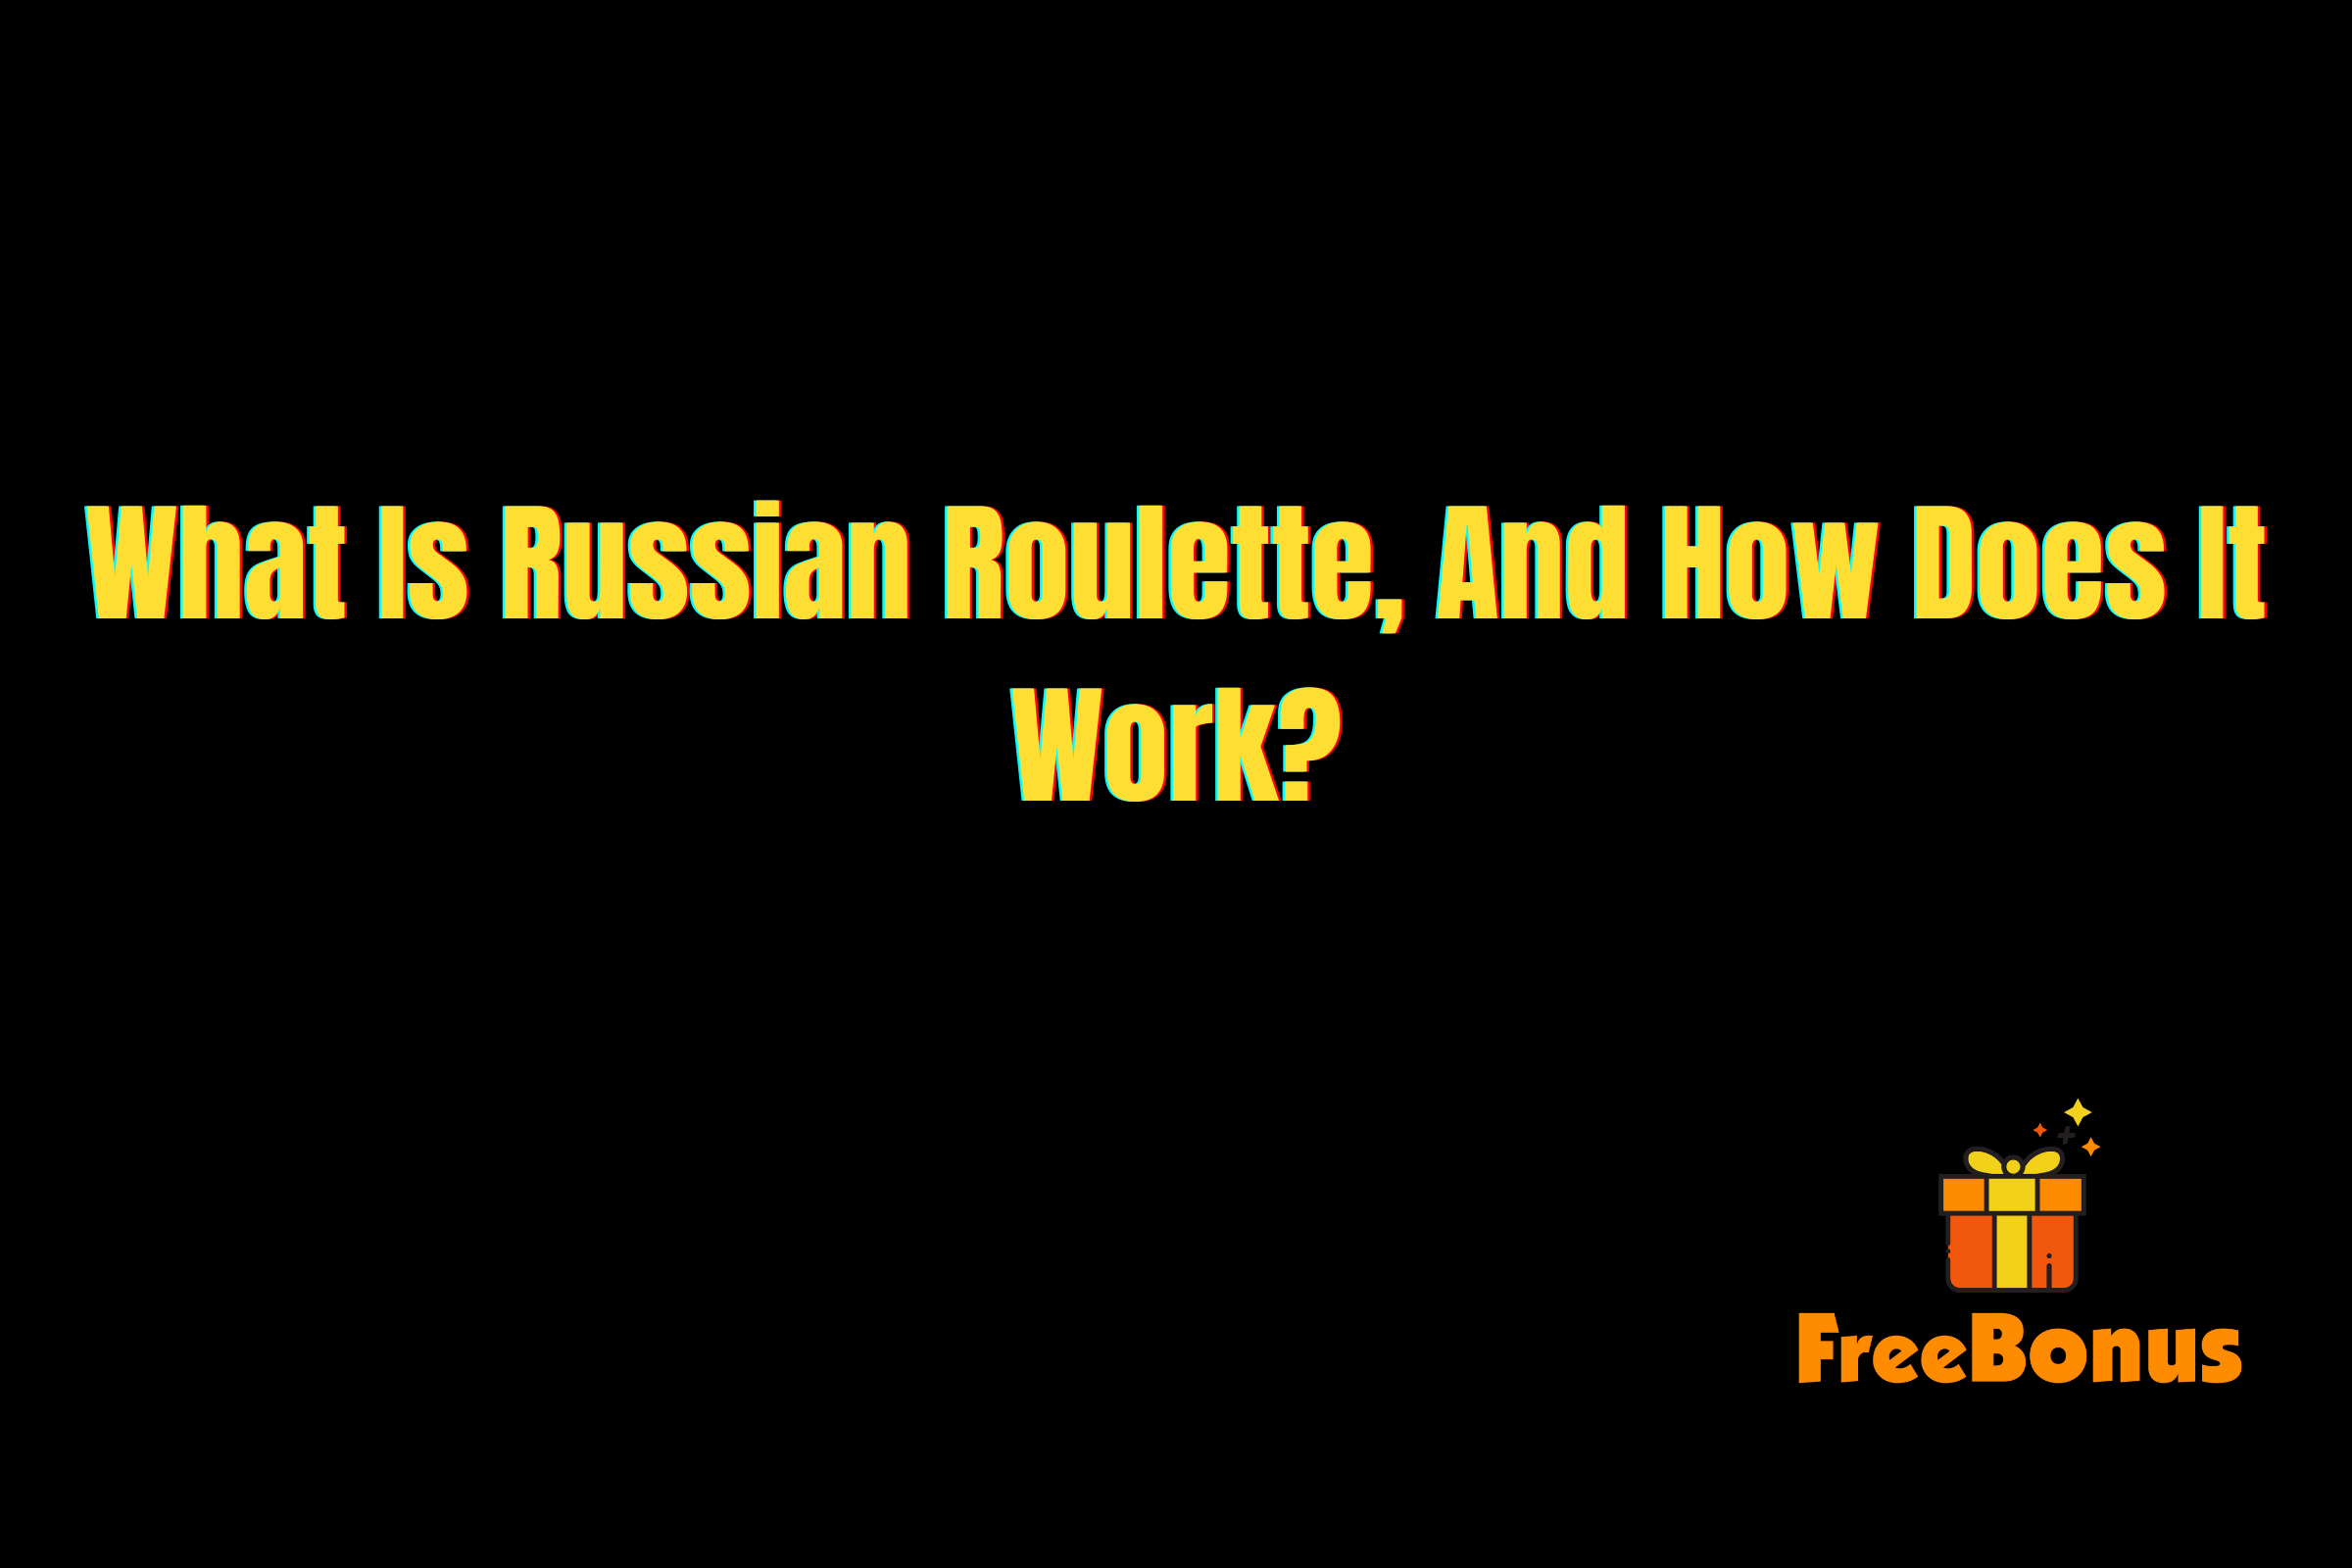 What Is Russian Roulette, And How Does It Work?